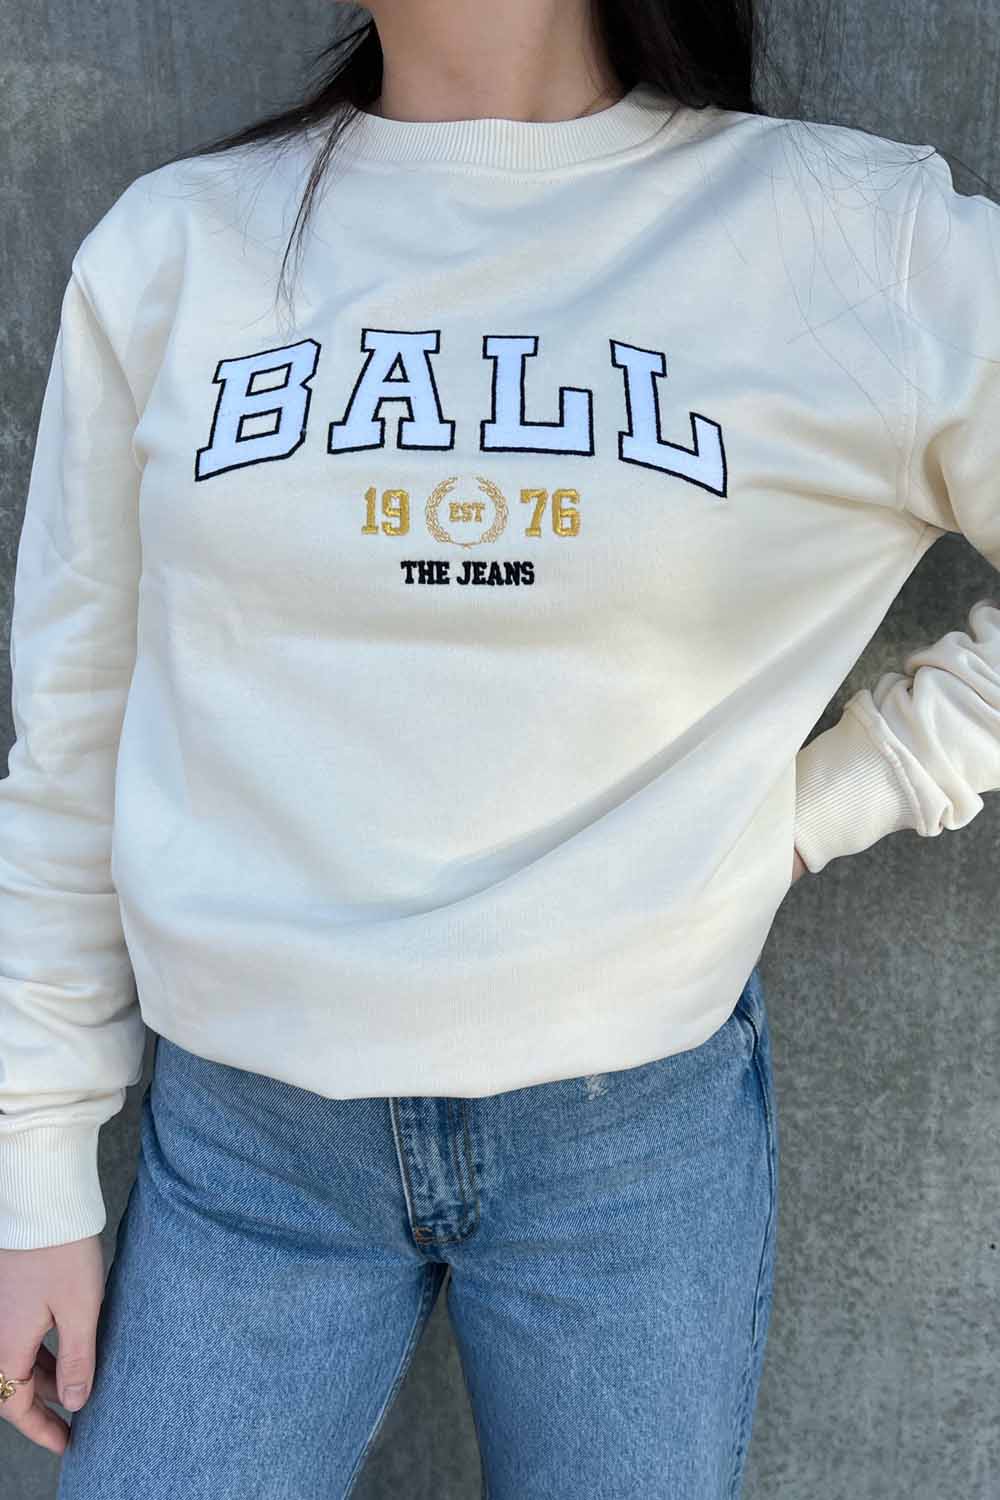 L. Taylor - Off White - Ball